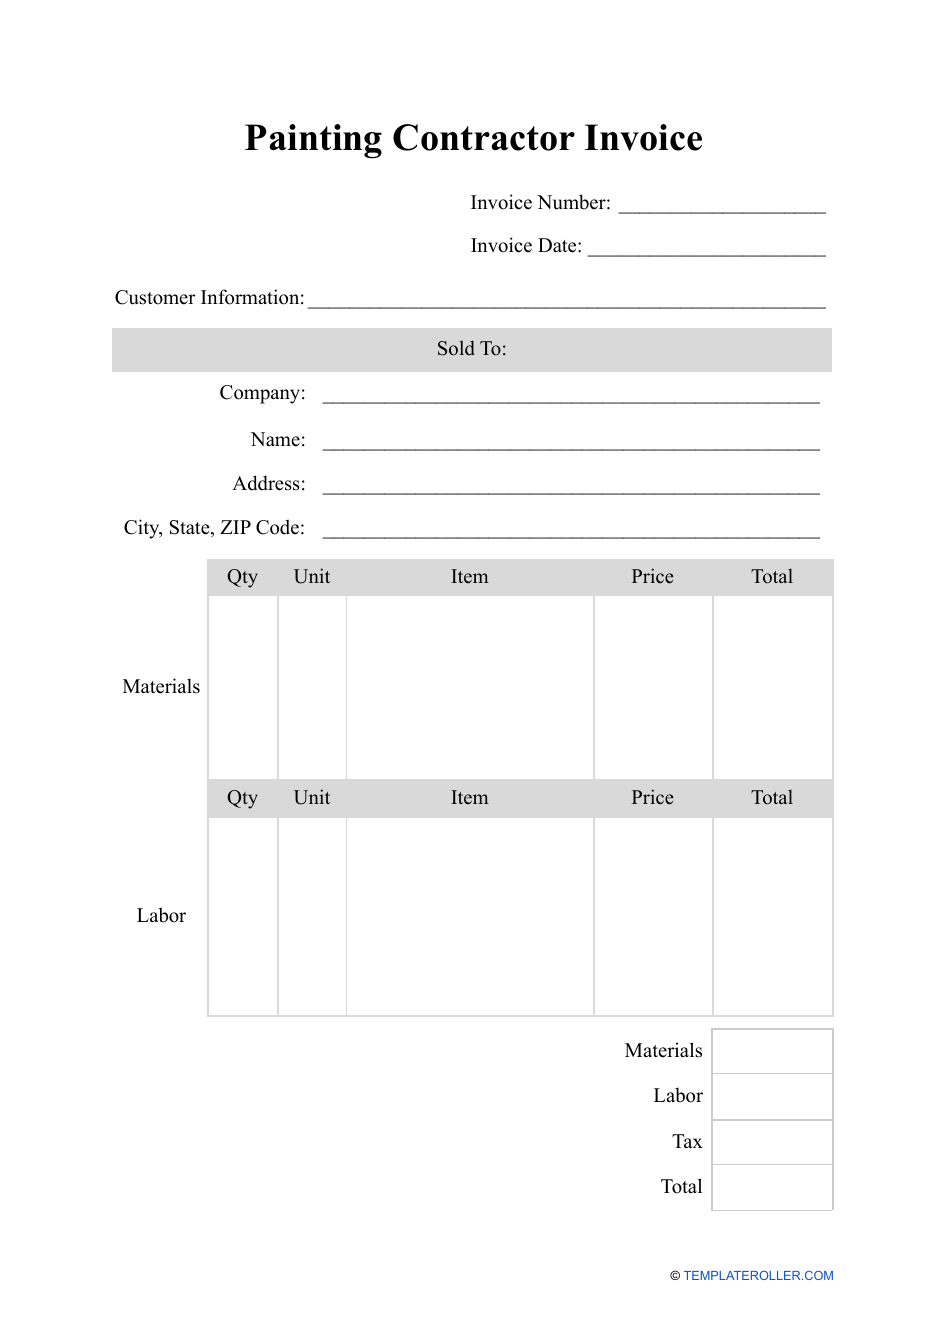 Painting Contractor Invoice Template, Page 1